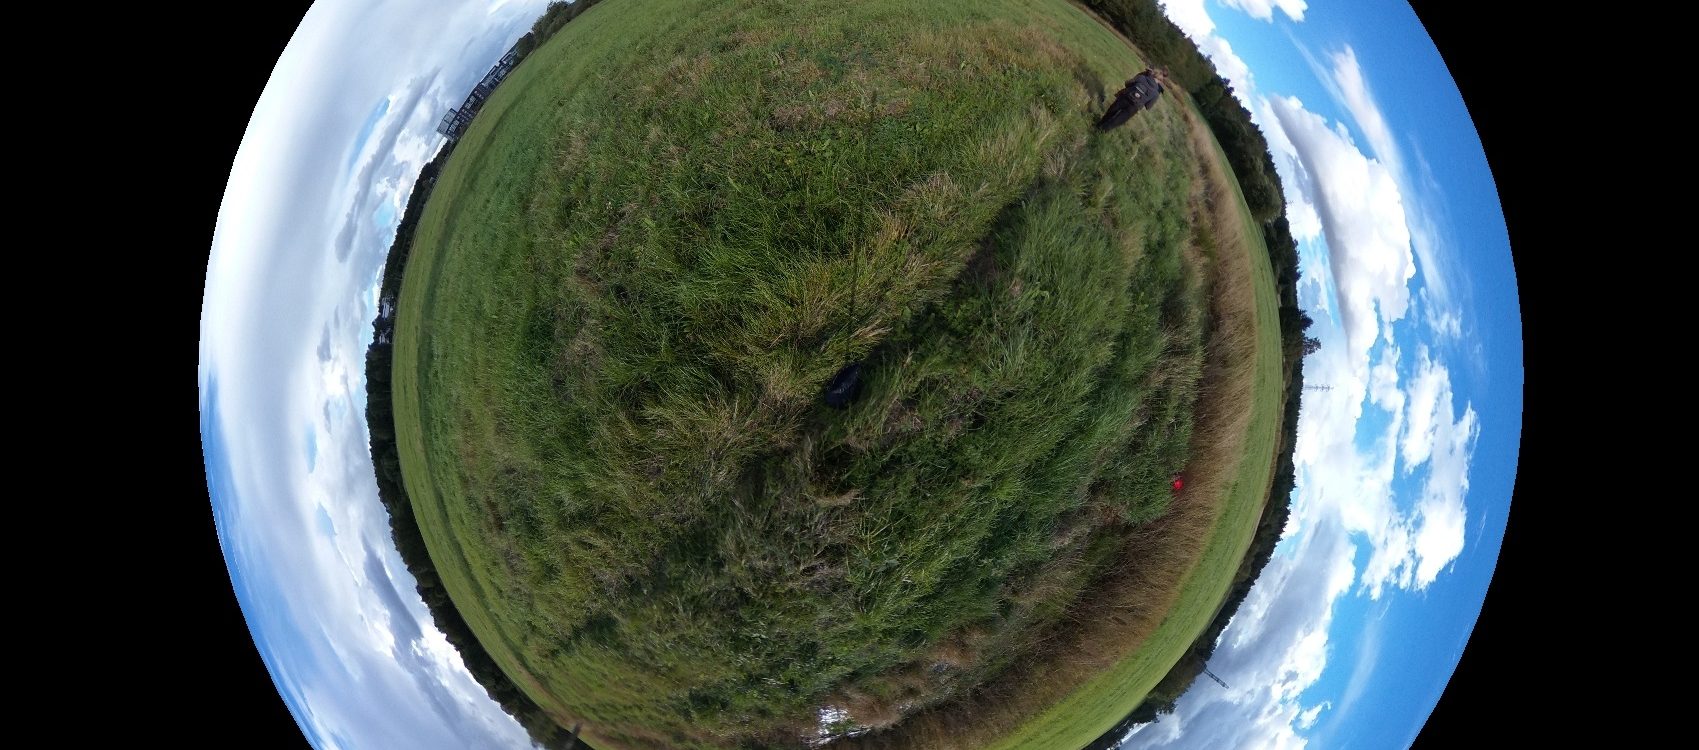 360 degree photo from a field in a summer day.